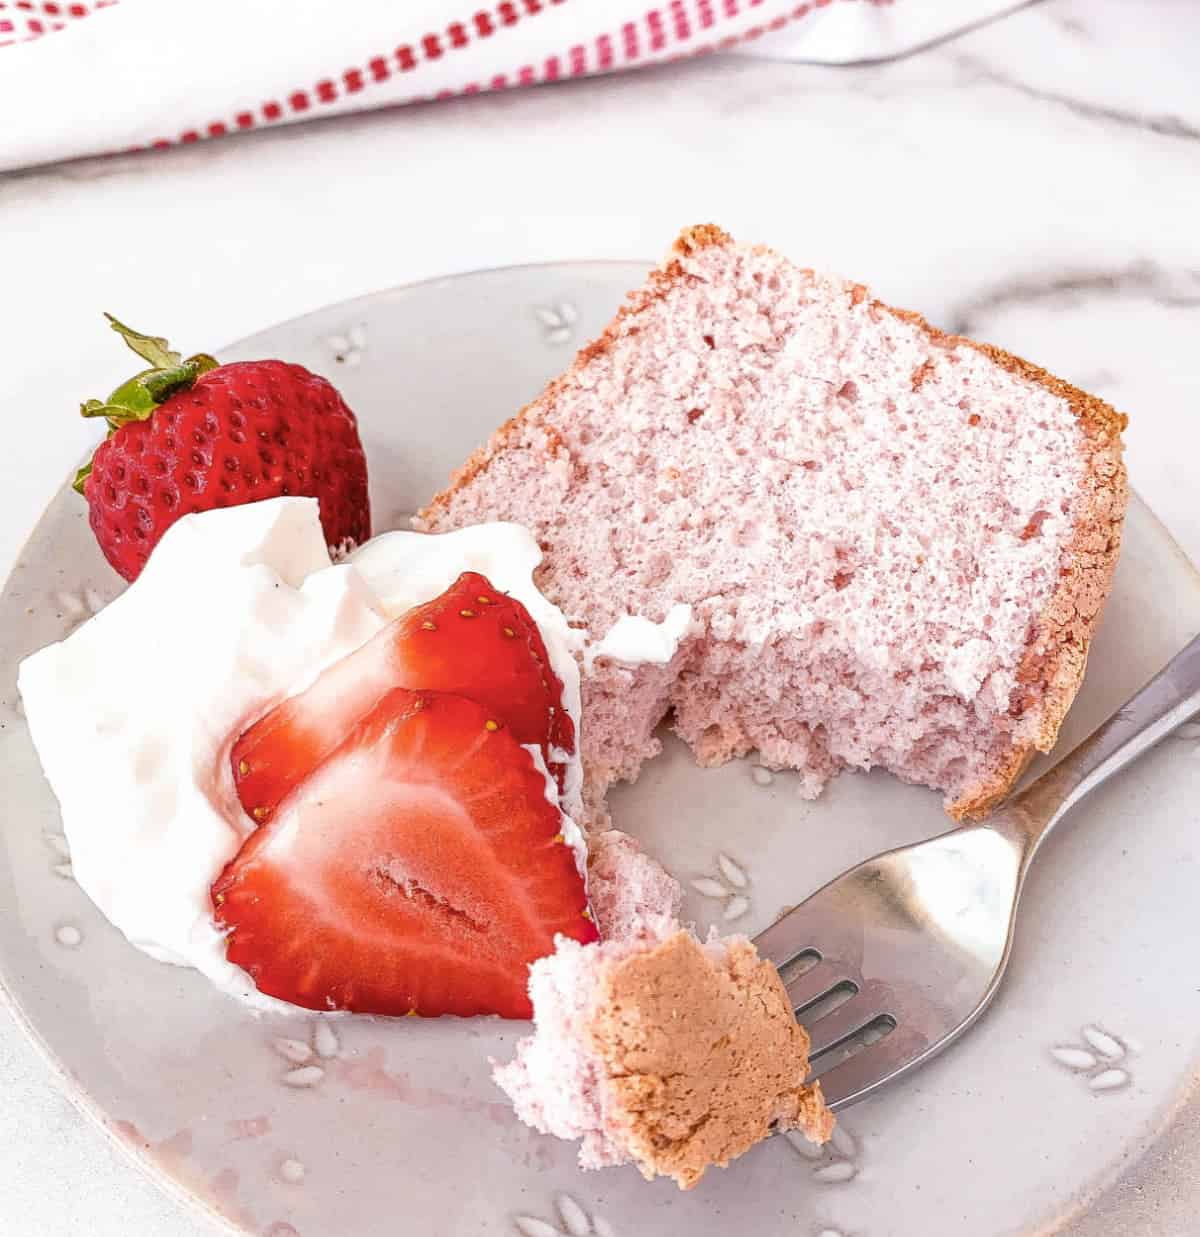 Partially eaten slice of Strawberry Angel Food Cake on a plate with whipped cream and fresh strawberries.